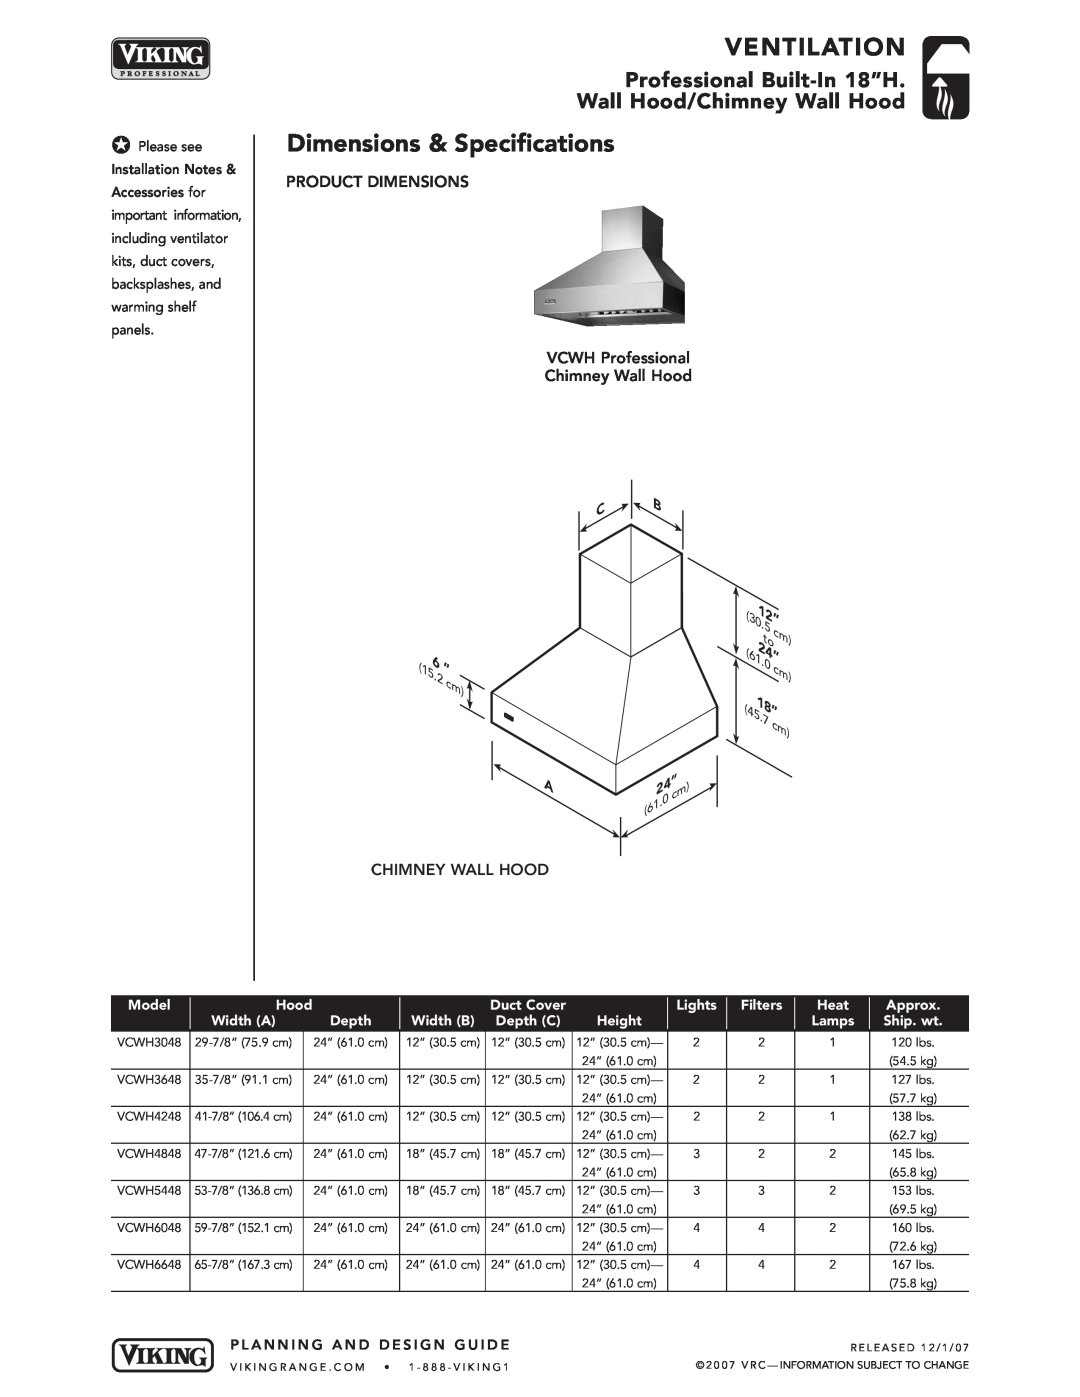 Viking VCWH dimensions Ventilation, Dimensions & Specifications, Professional Built-In 18”H Wall Hood/Chimney Wall Hood 